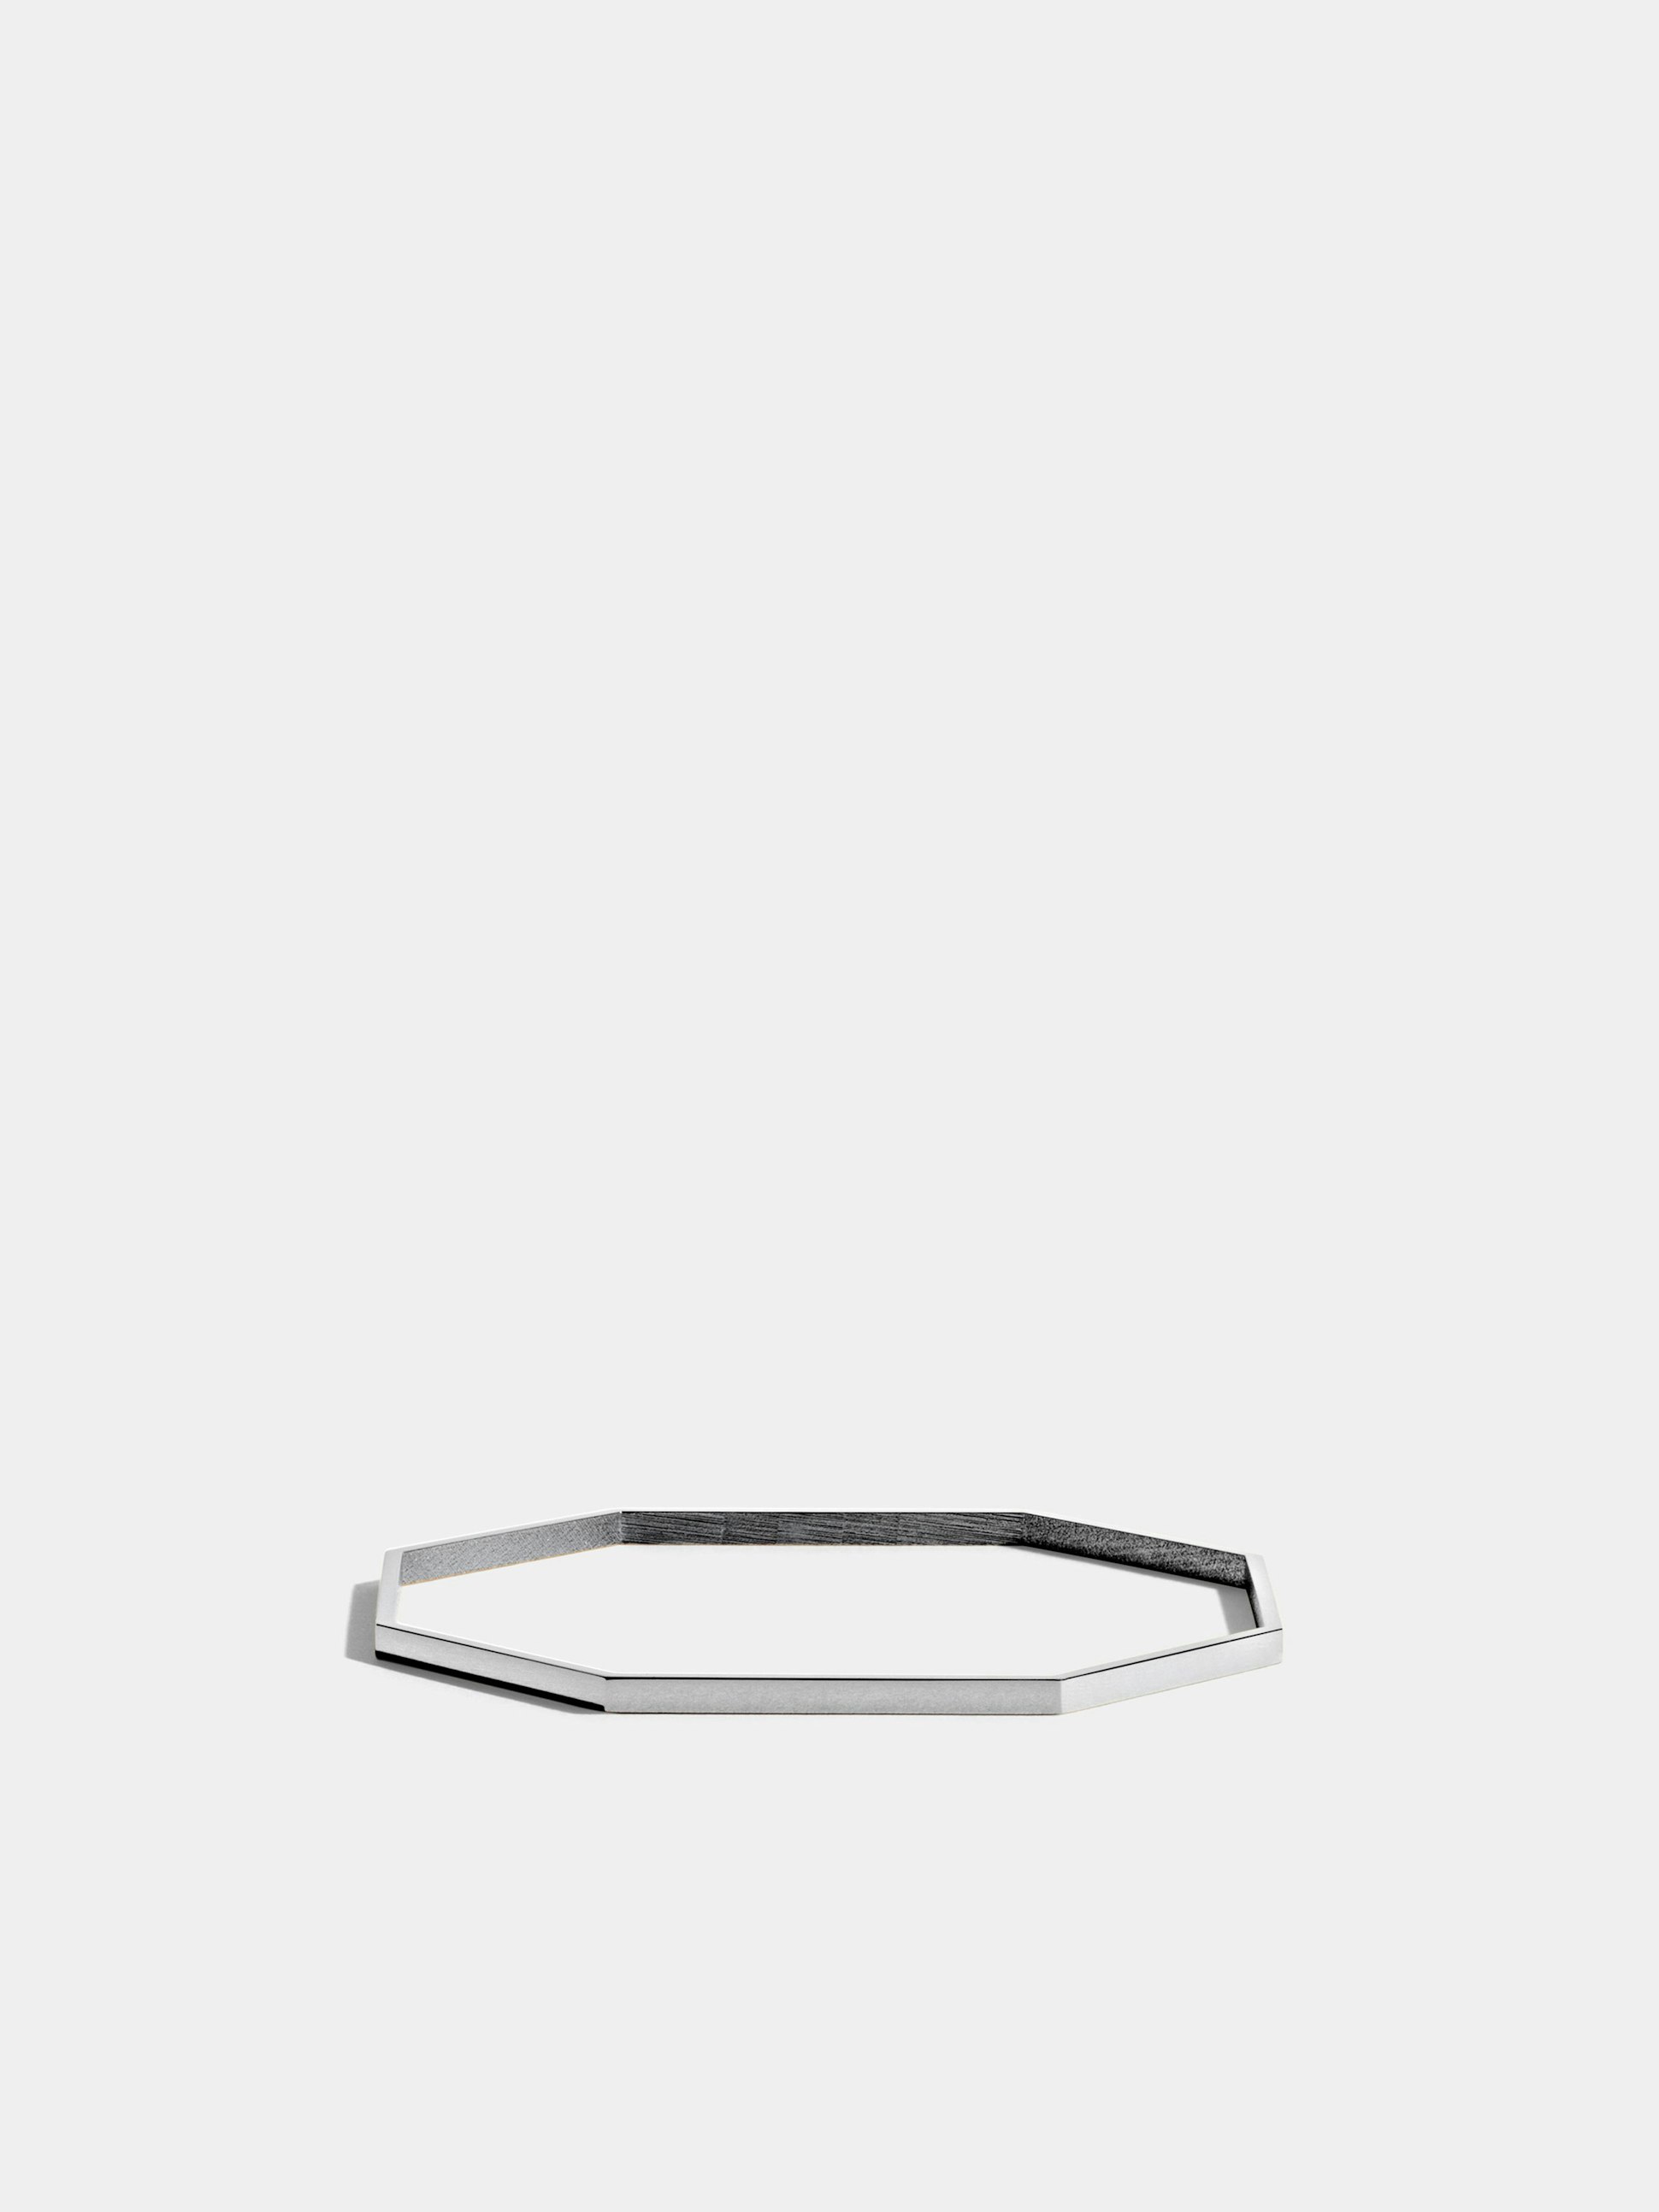 Octogone simple bangle in 18k Fairmined ethical white gold